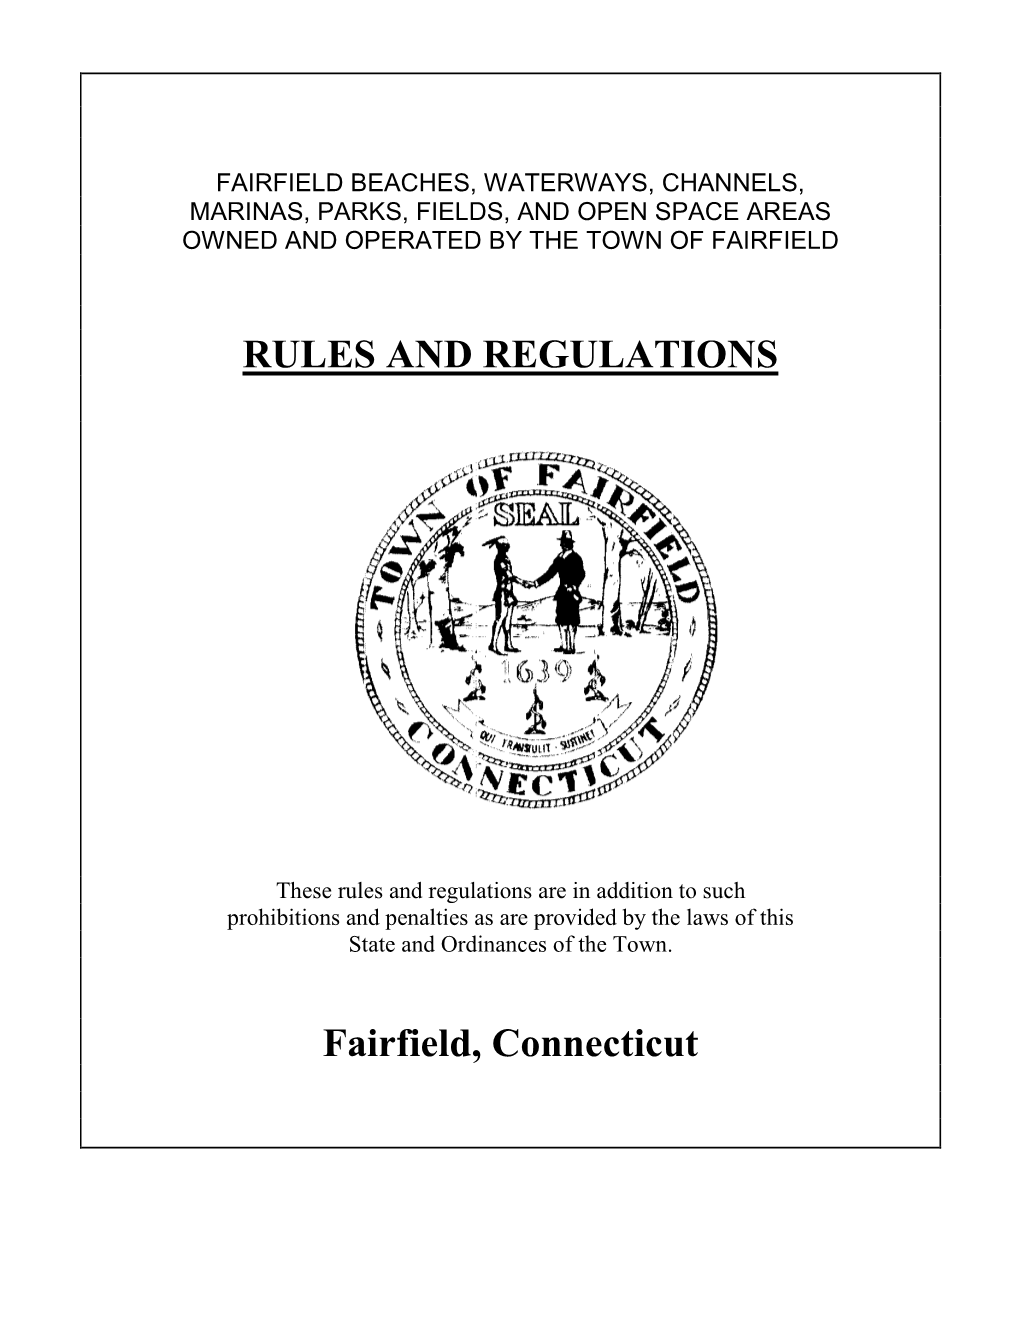 RULES and REGULATIONS Fairfield, Connecticut